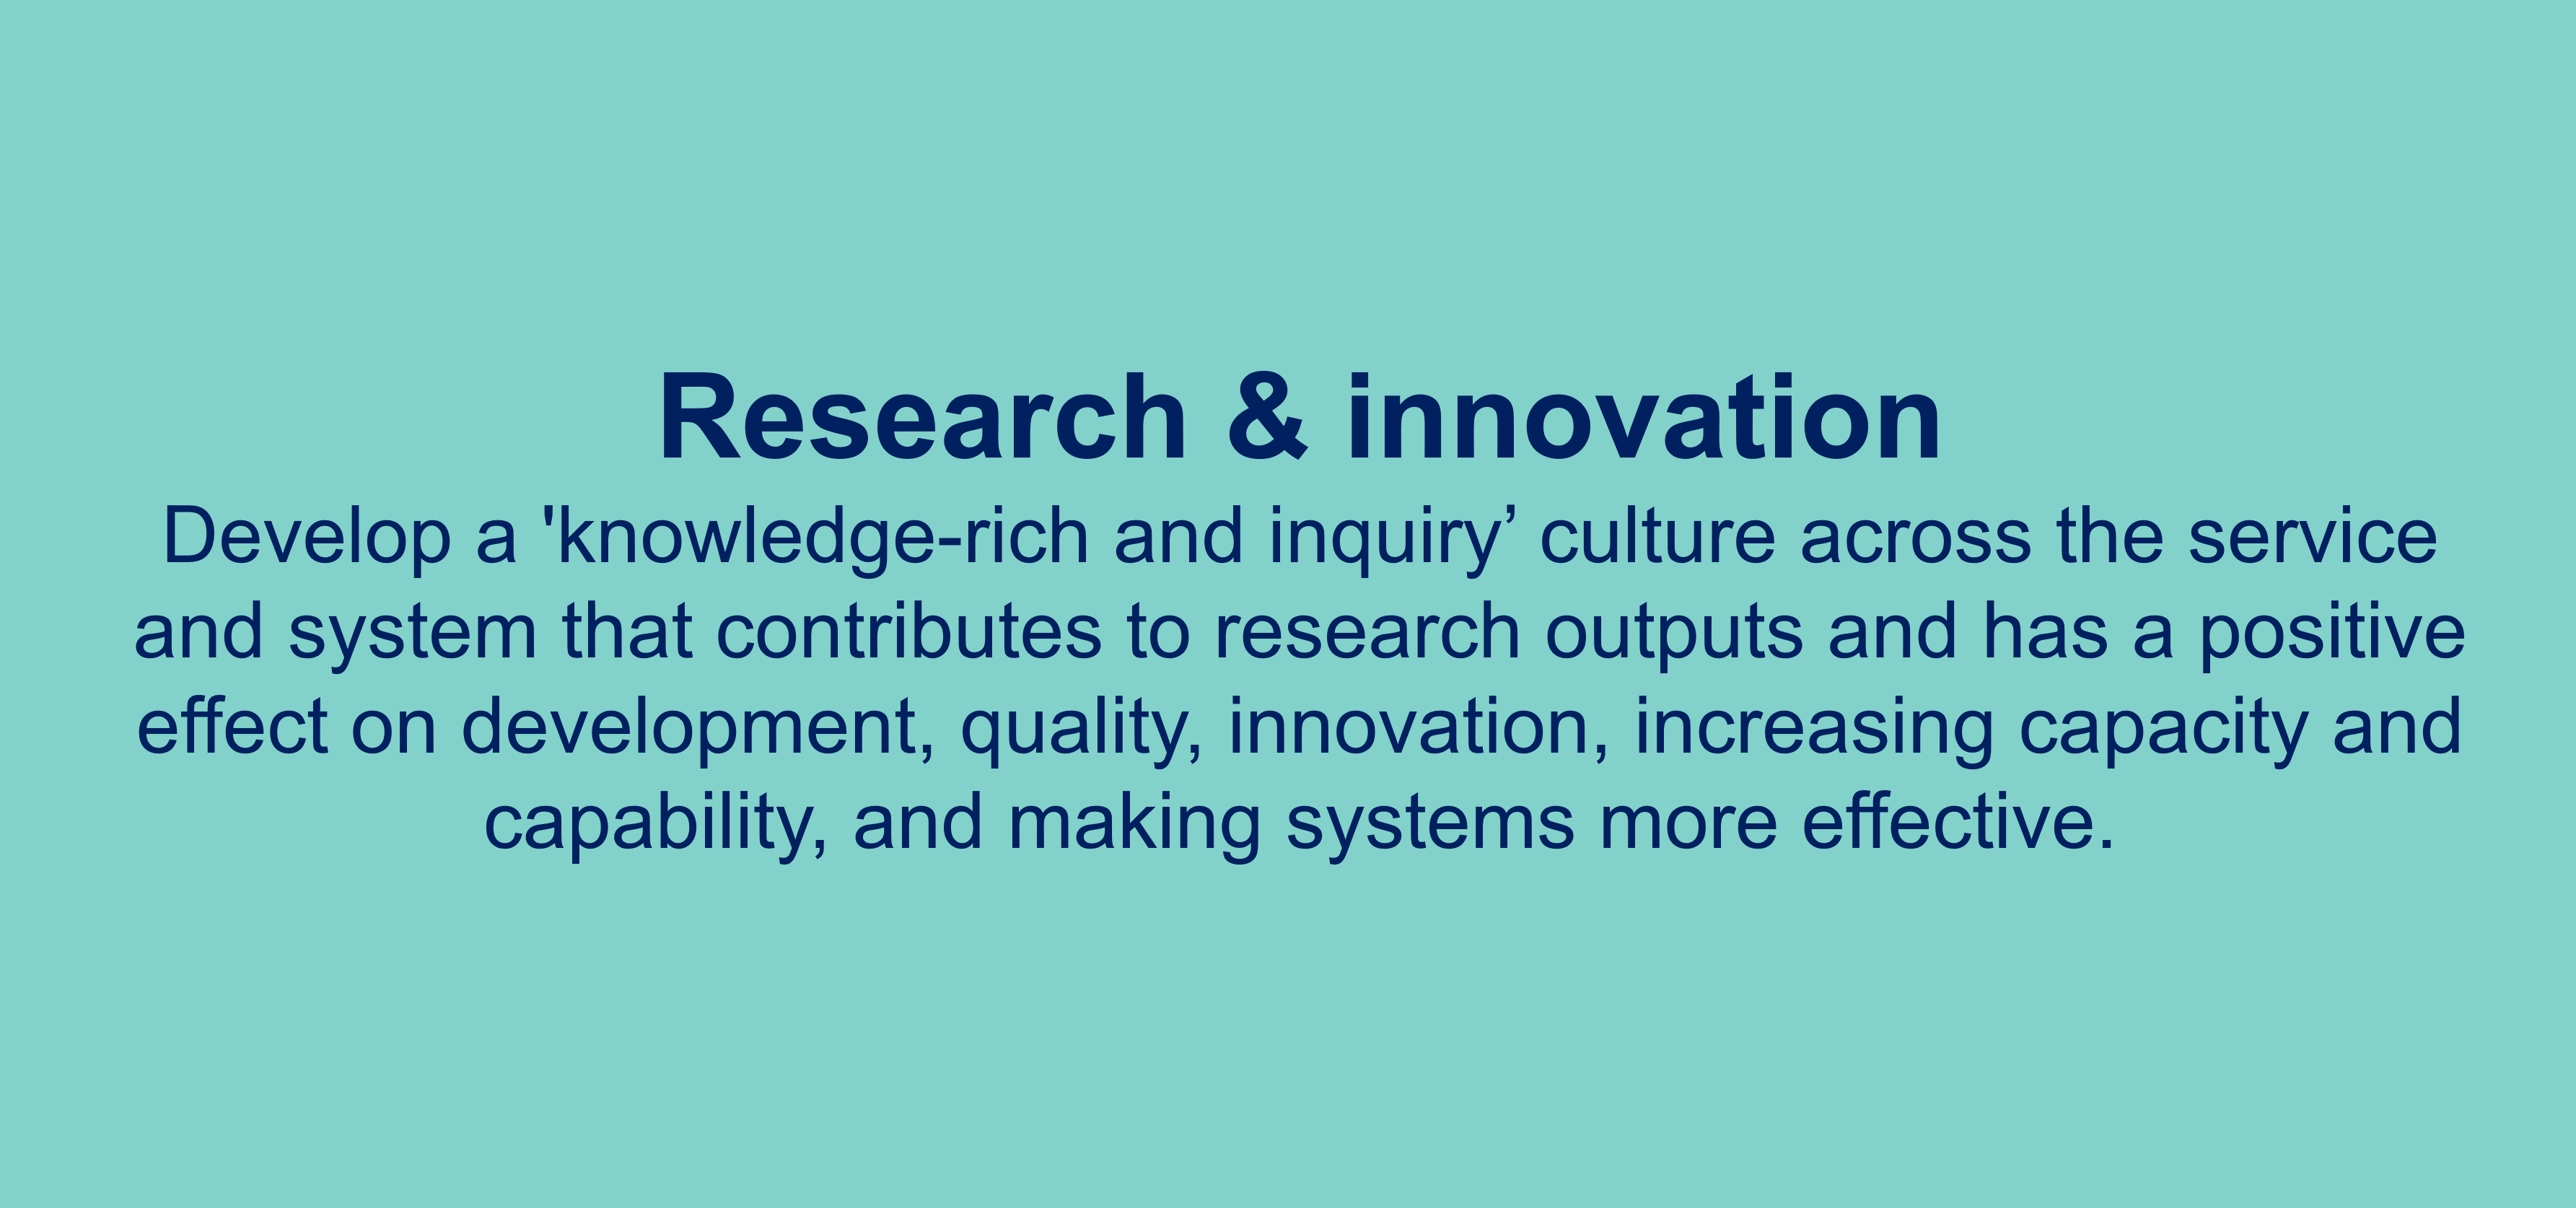 Consultant - Research & innovation
Develop a 'knowledge-rich and inquiry’ culture across the service
and system that contributes to research outputs and has a positive
effect on development, quality, innovation, increasing capacity and
capability, and making systems more effective.
